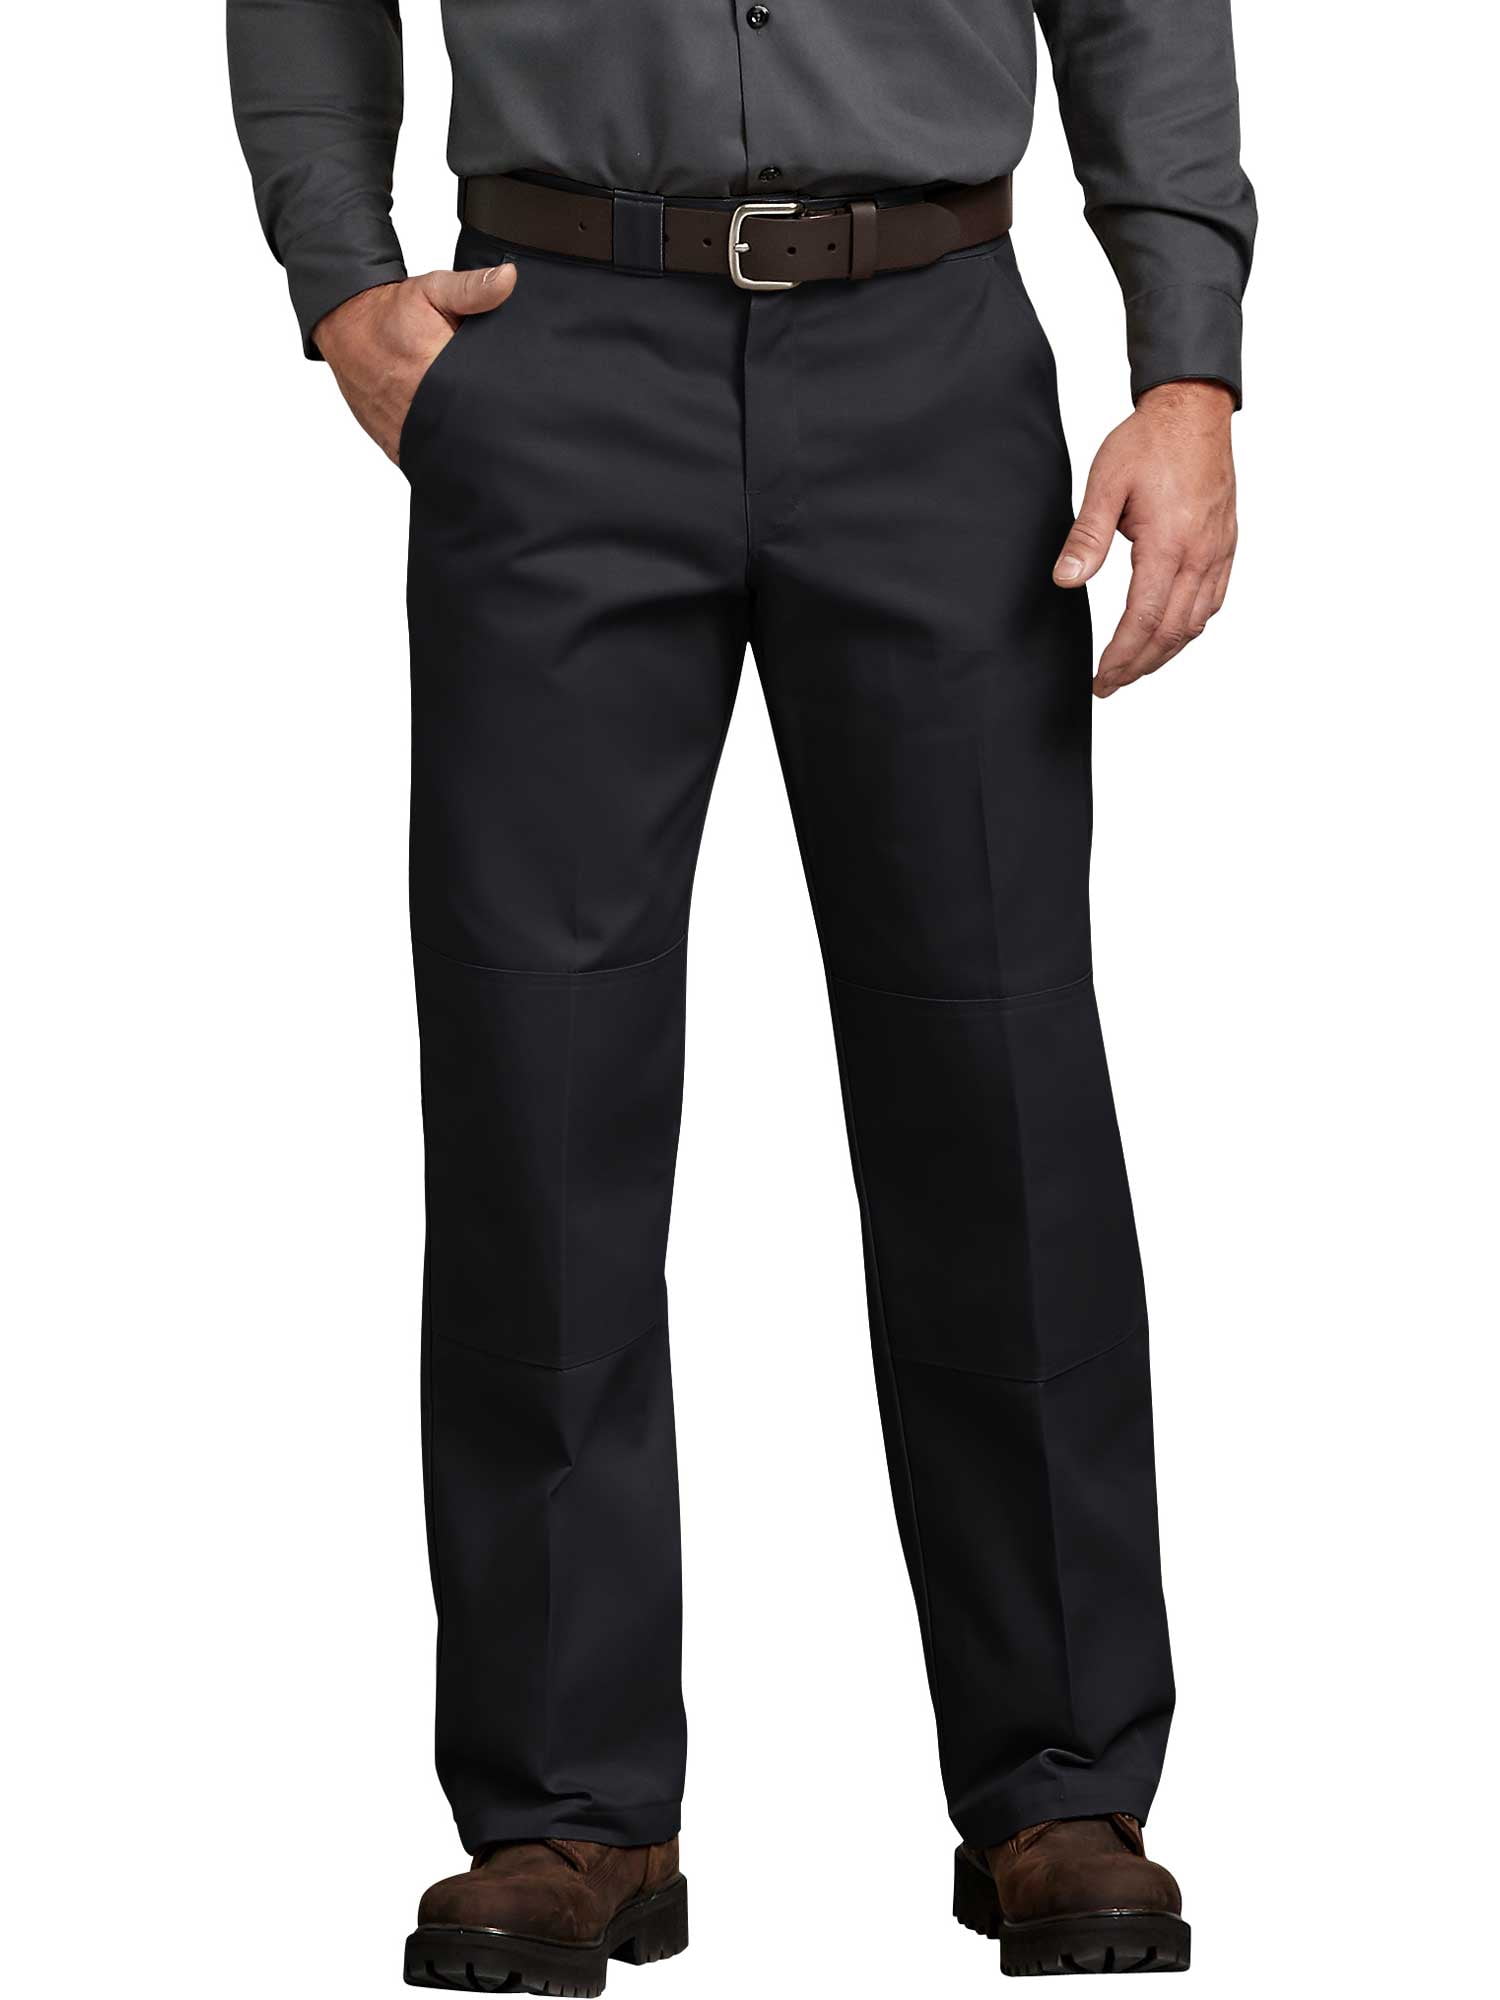 Dickies Mens Relaxed Fit Straight Leg Double Knee Pants   Walmart.com